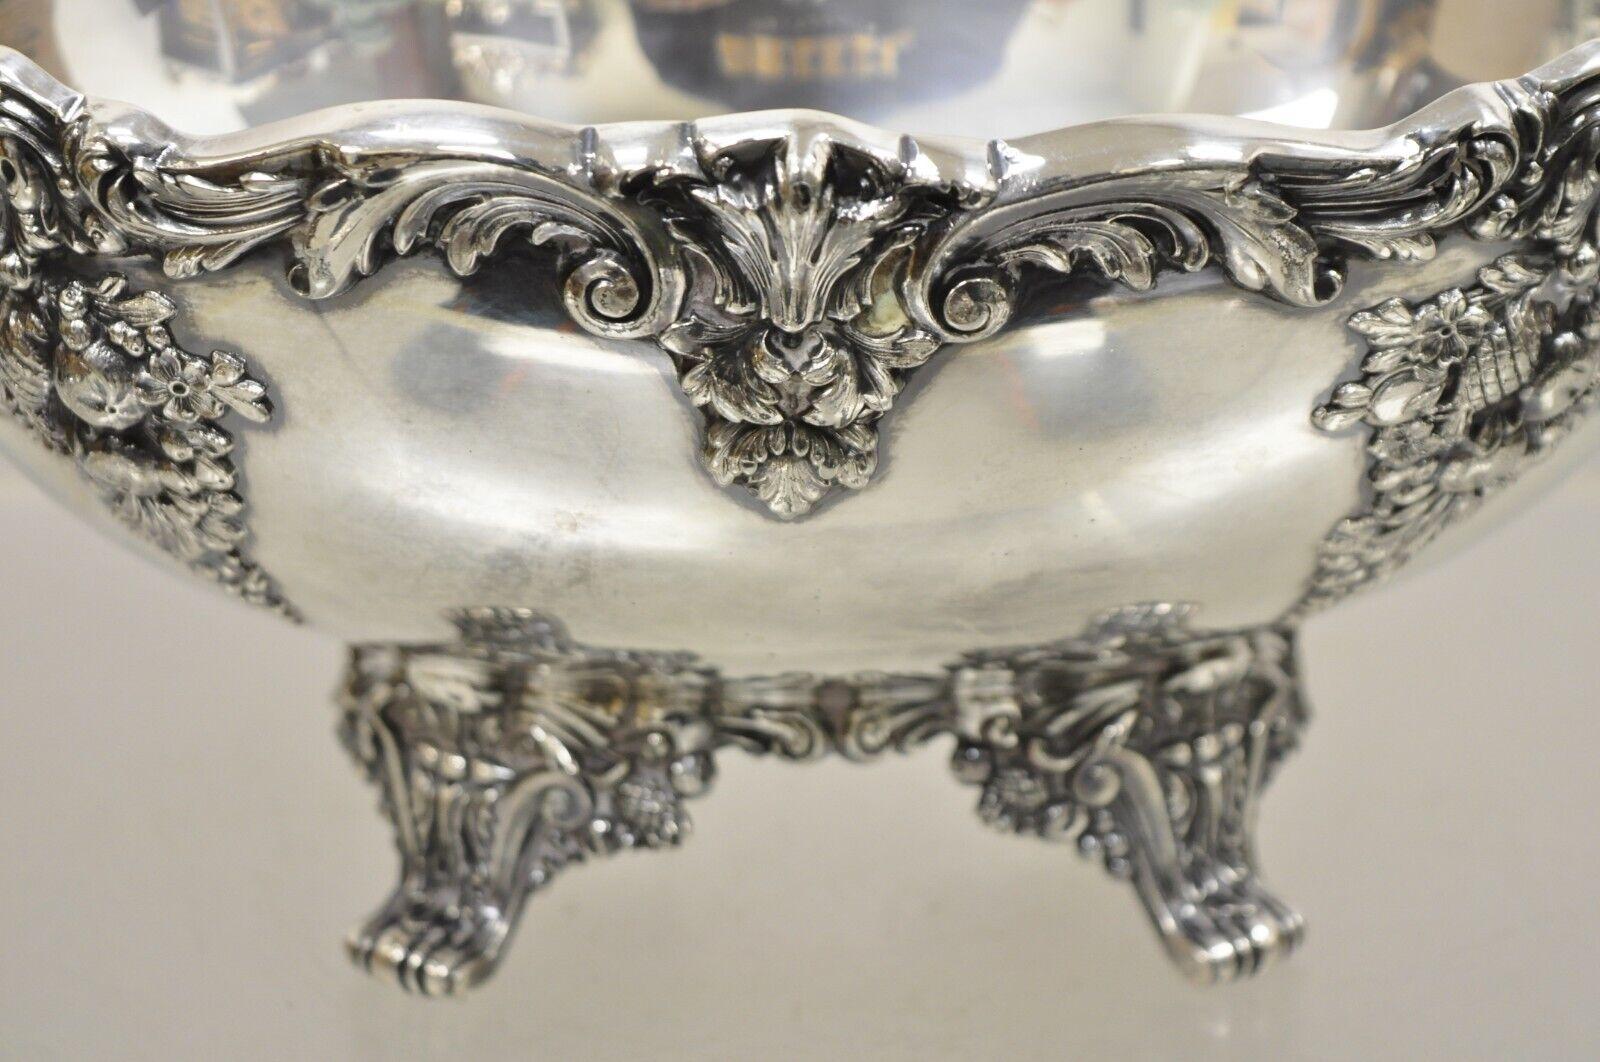 Reed & Barton King Francis 1684 Victorian Silver Plated Oval Footed Serving Bowl 4